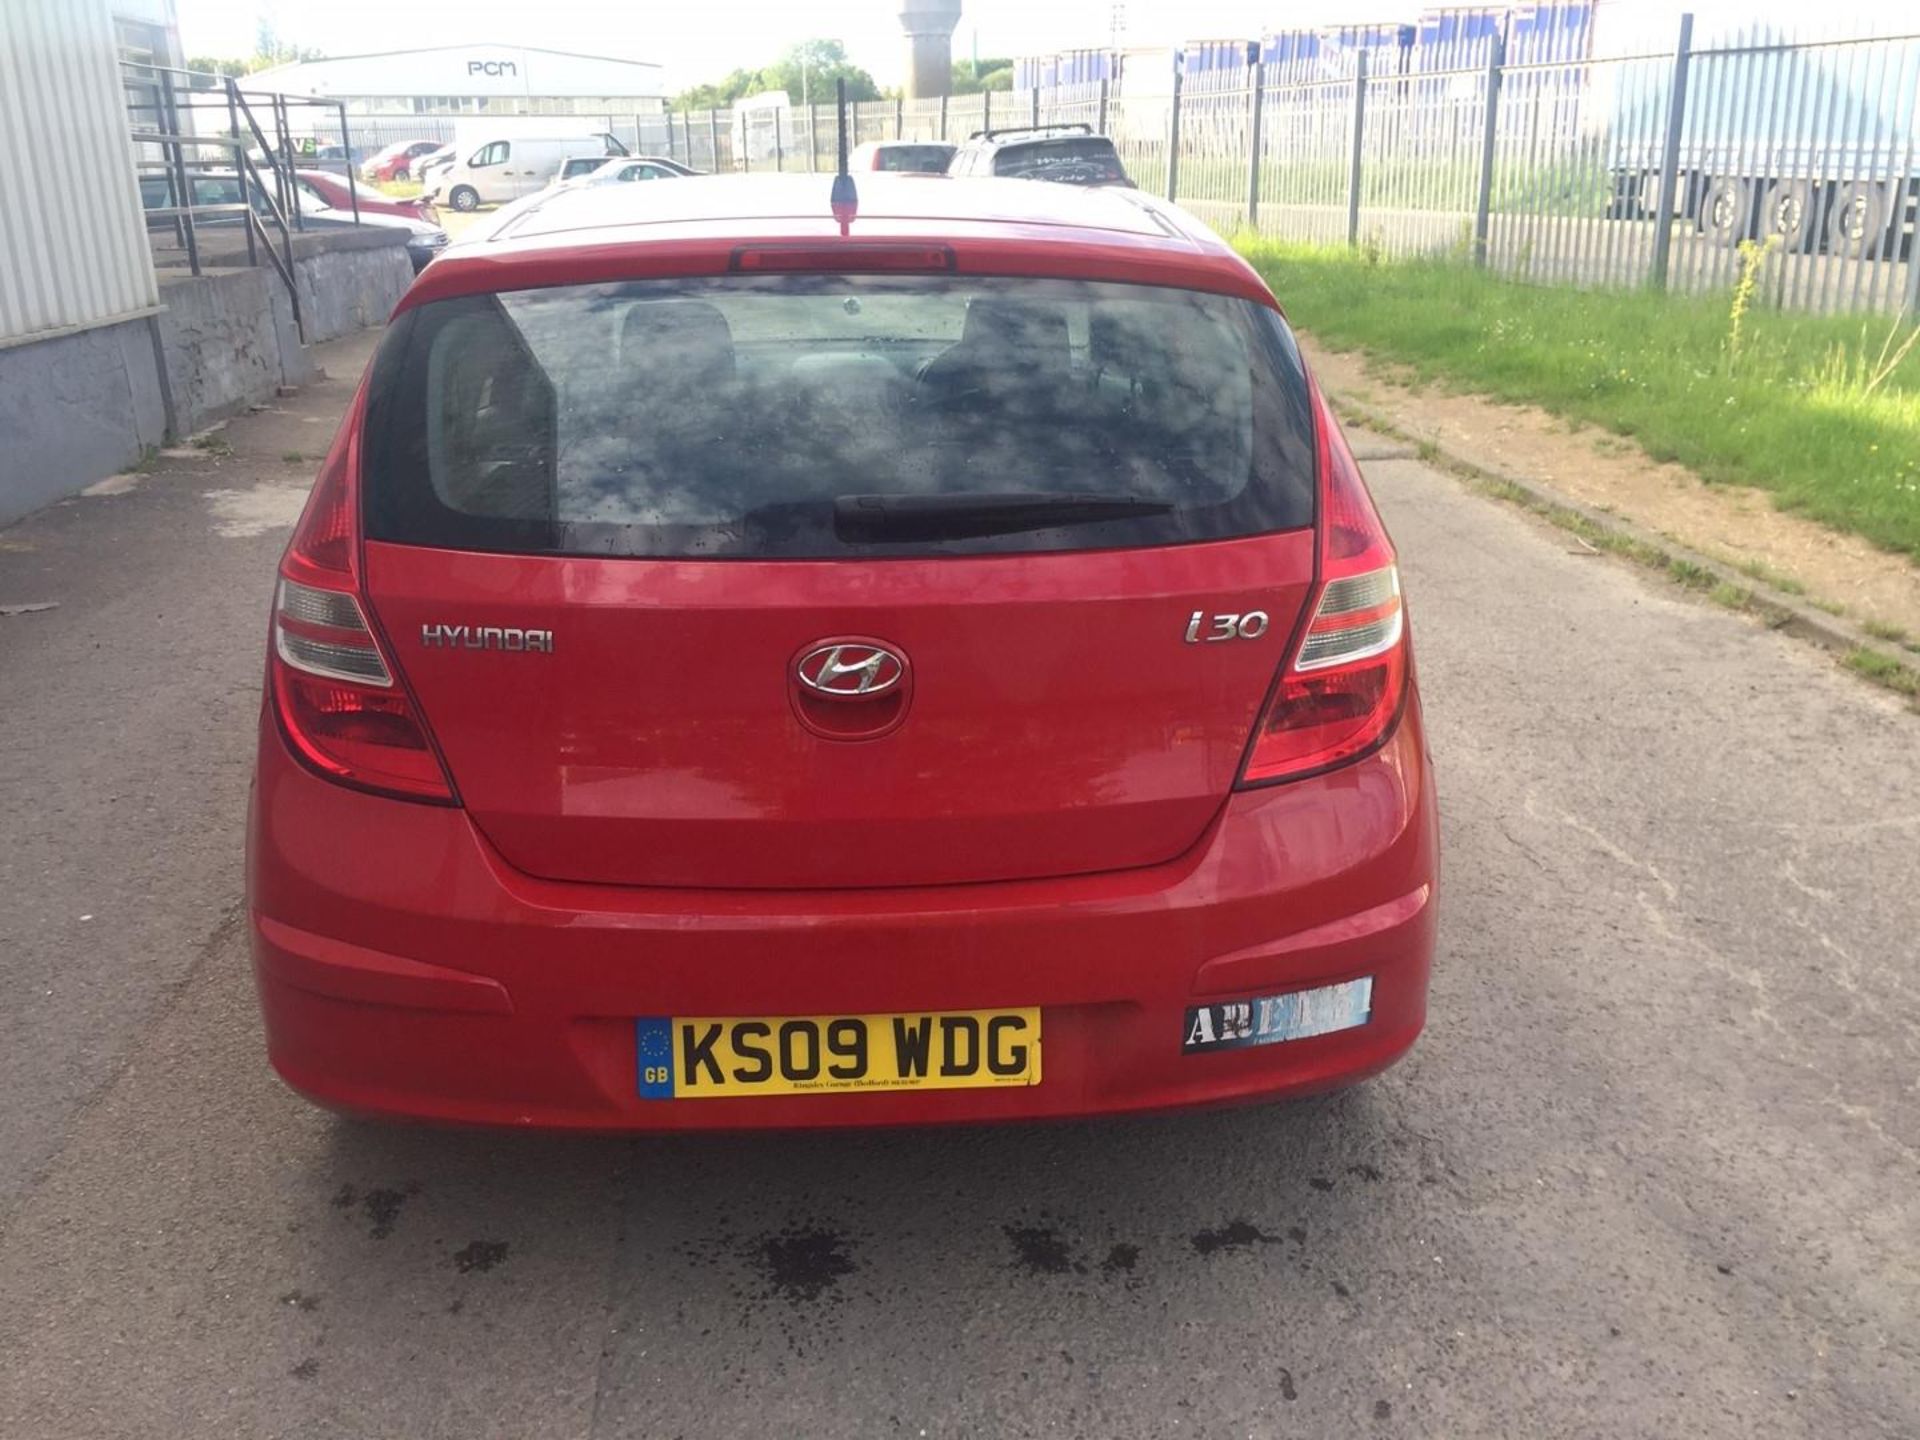 2009 Hyundai i30 Comfort 1.6 Petrol - CL505 - NO VAT ON THE HAMMER - Location: Corby - Image 8 of 11